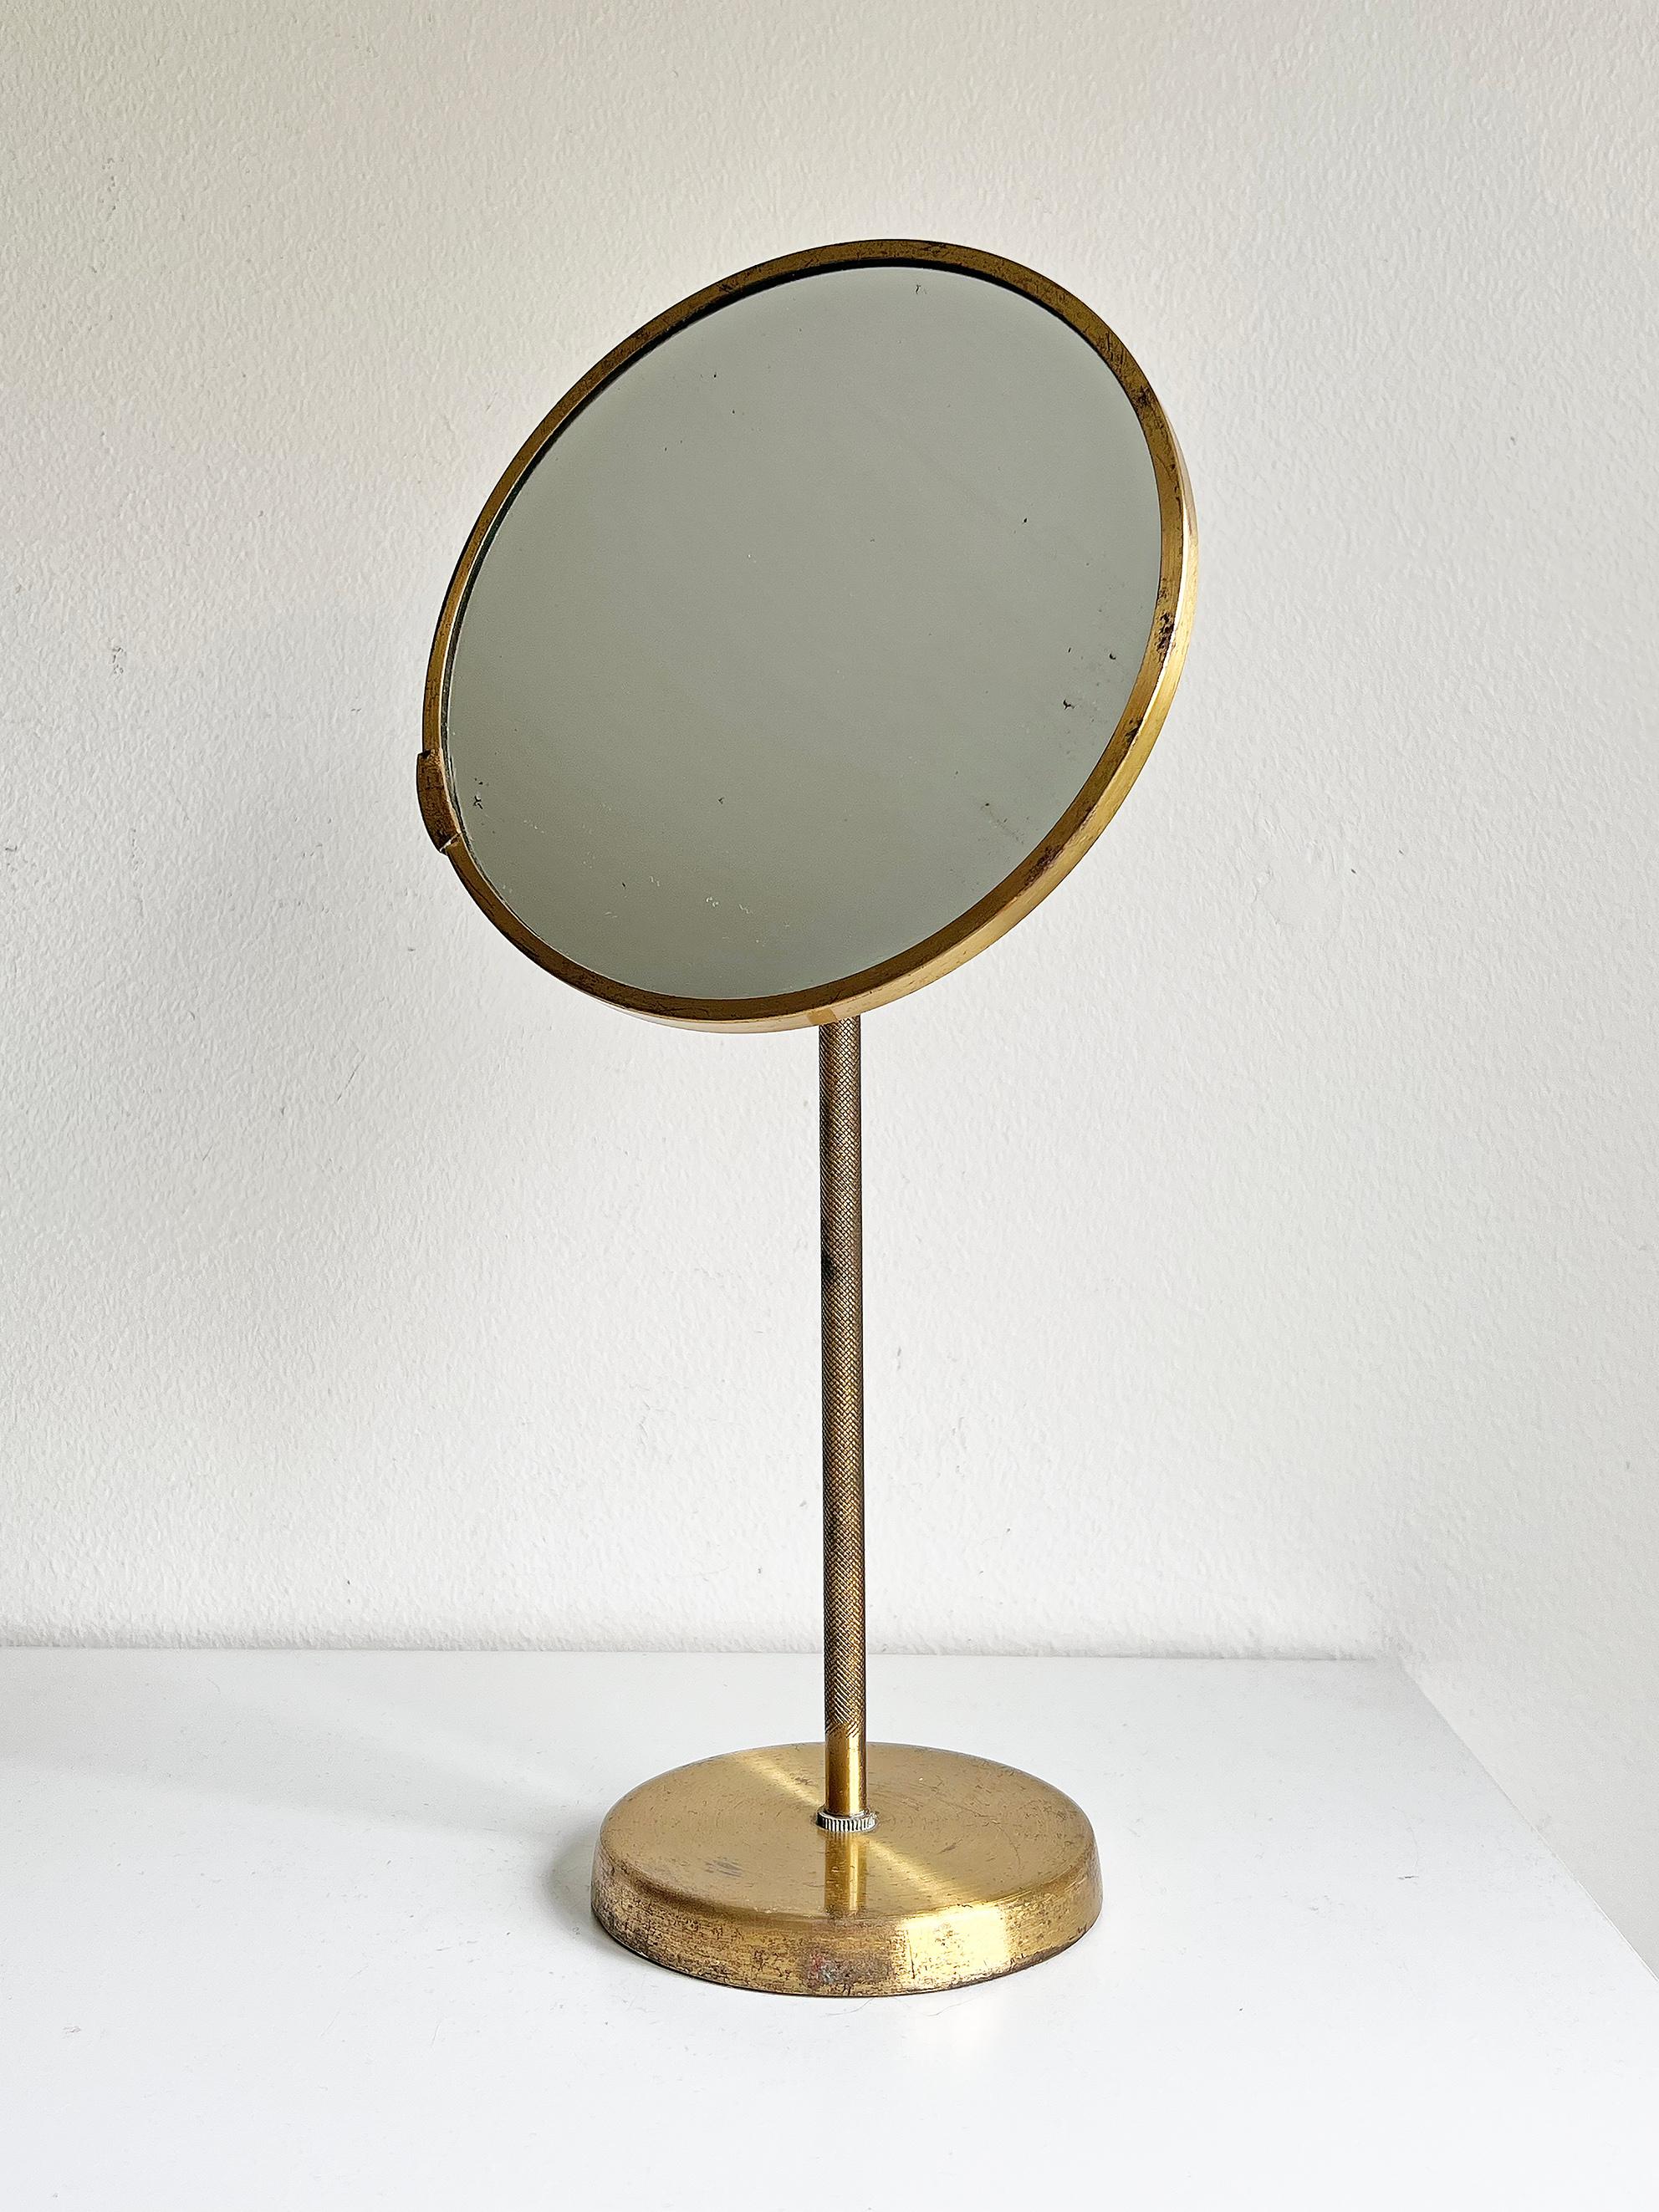 Swedish modern mirror in brass. Unknown designer and maker.
Good vintage condition, wear consistent with age and use. 
Age appropriate brass and mirror patina.